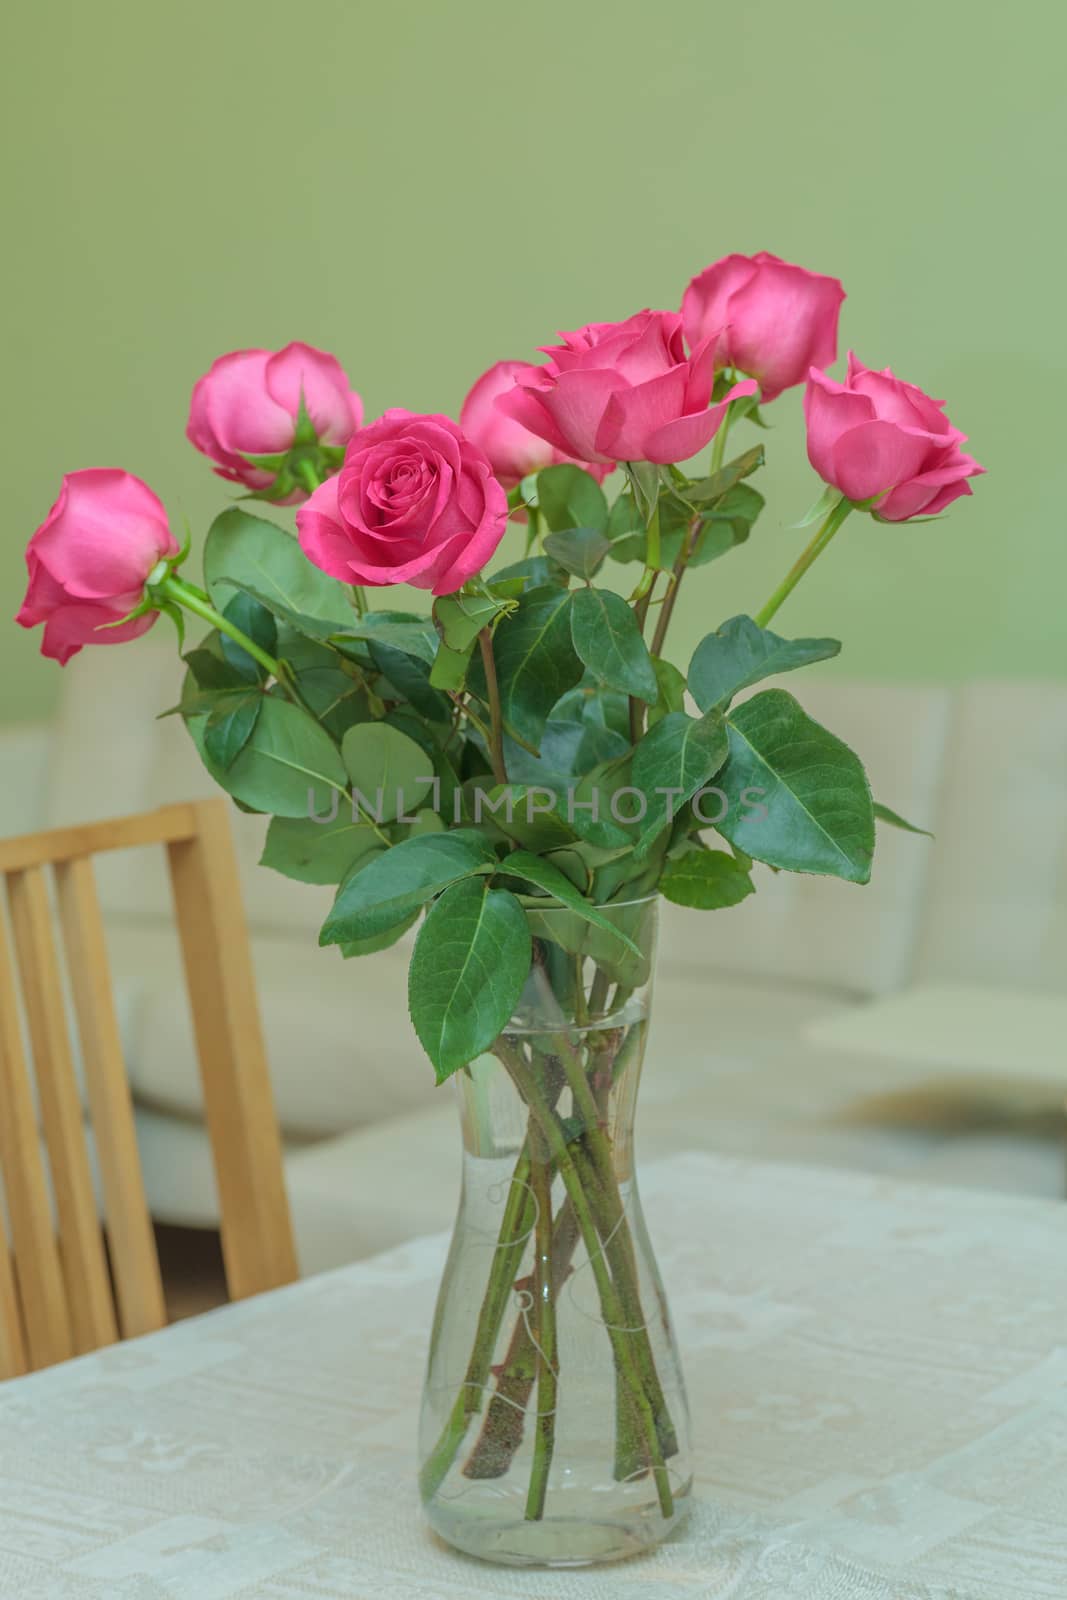 Seven pink roses bouquet in vase standing on table